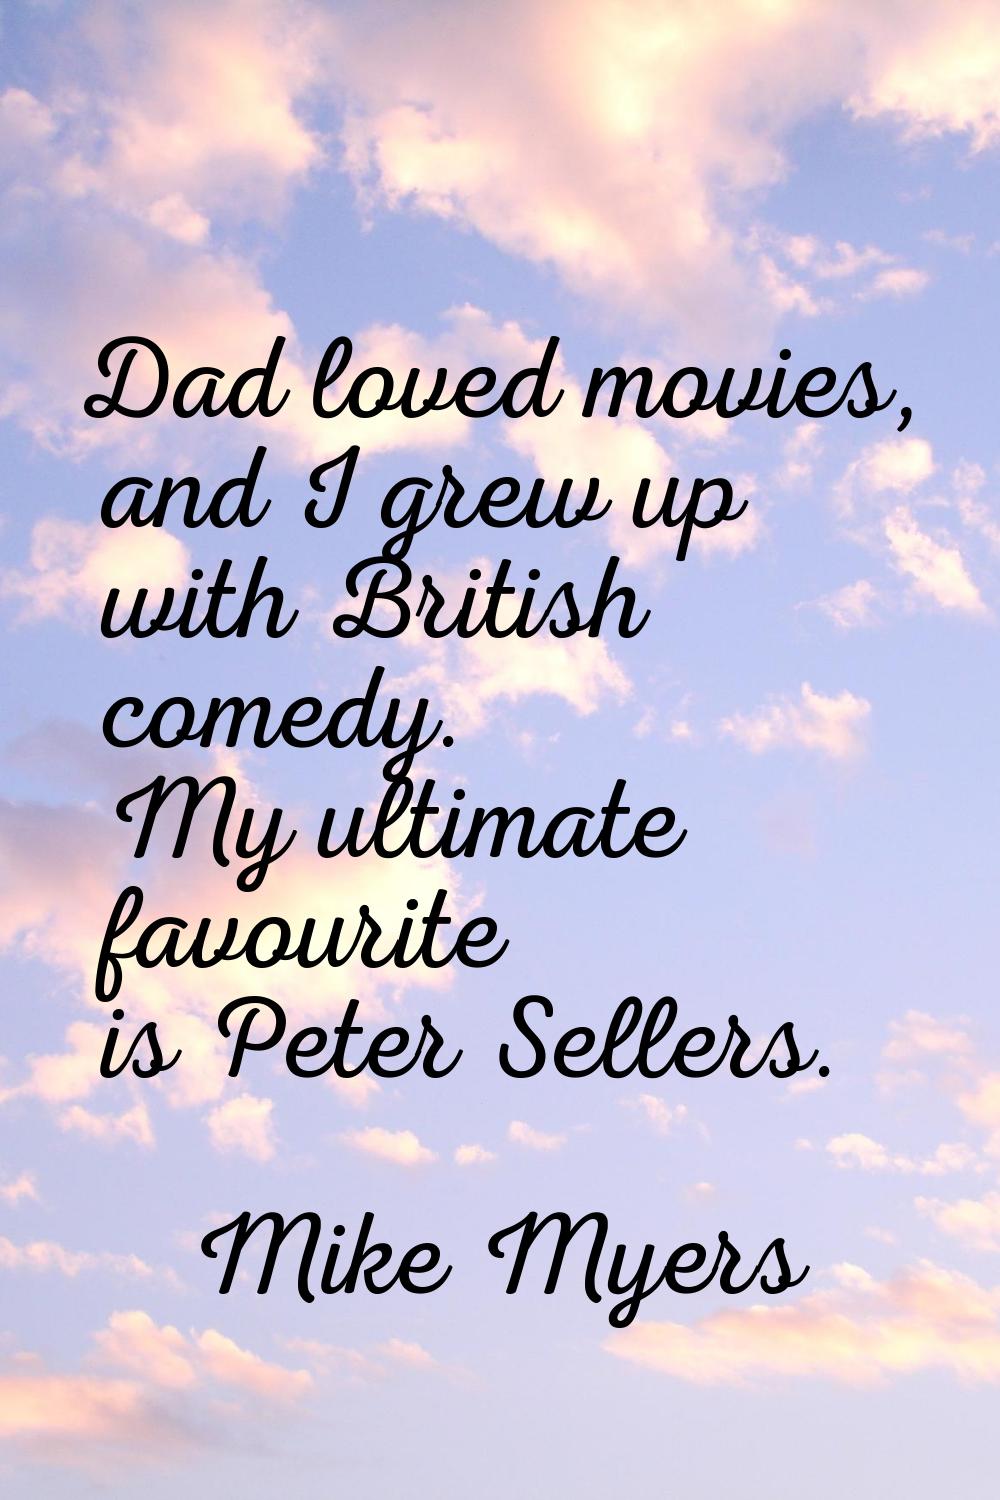 Dad loved movies, and I grew up with British comedy. My ultimate favourite is Peter Sellers.